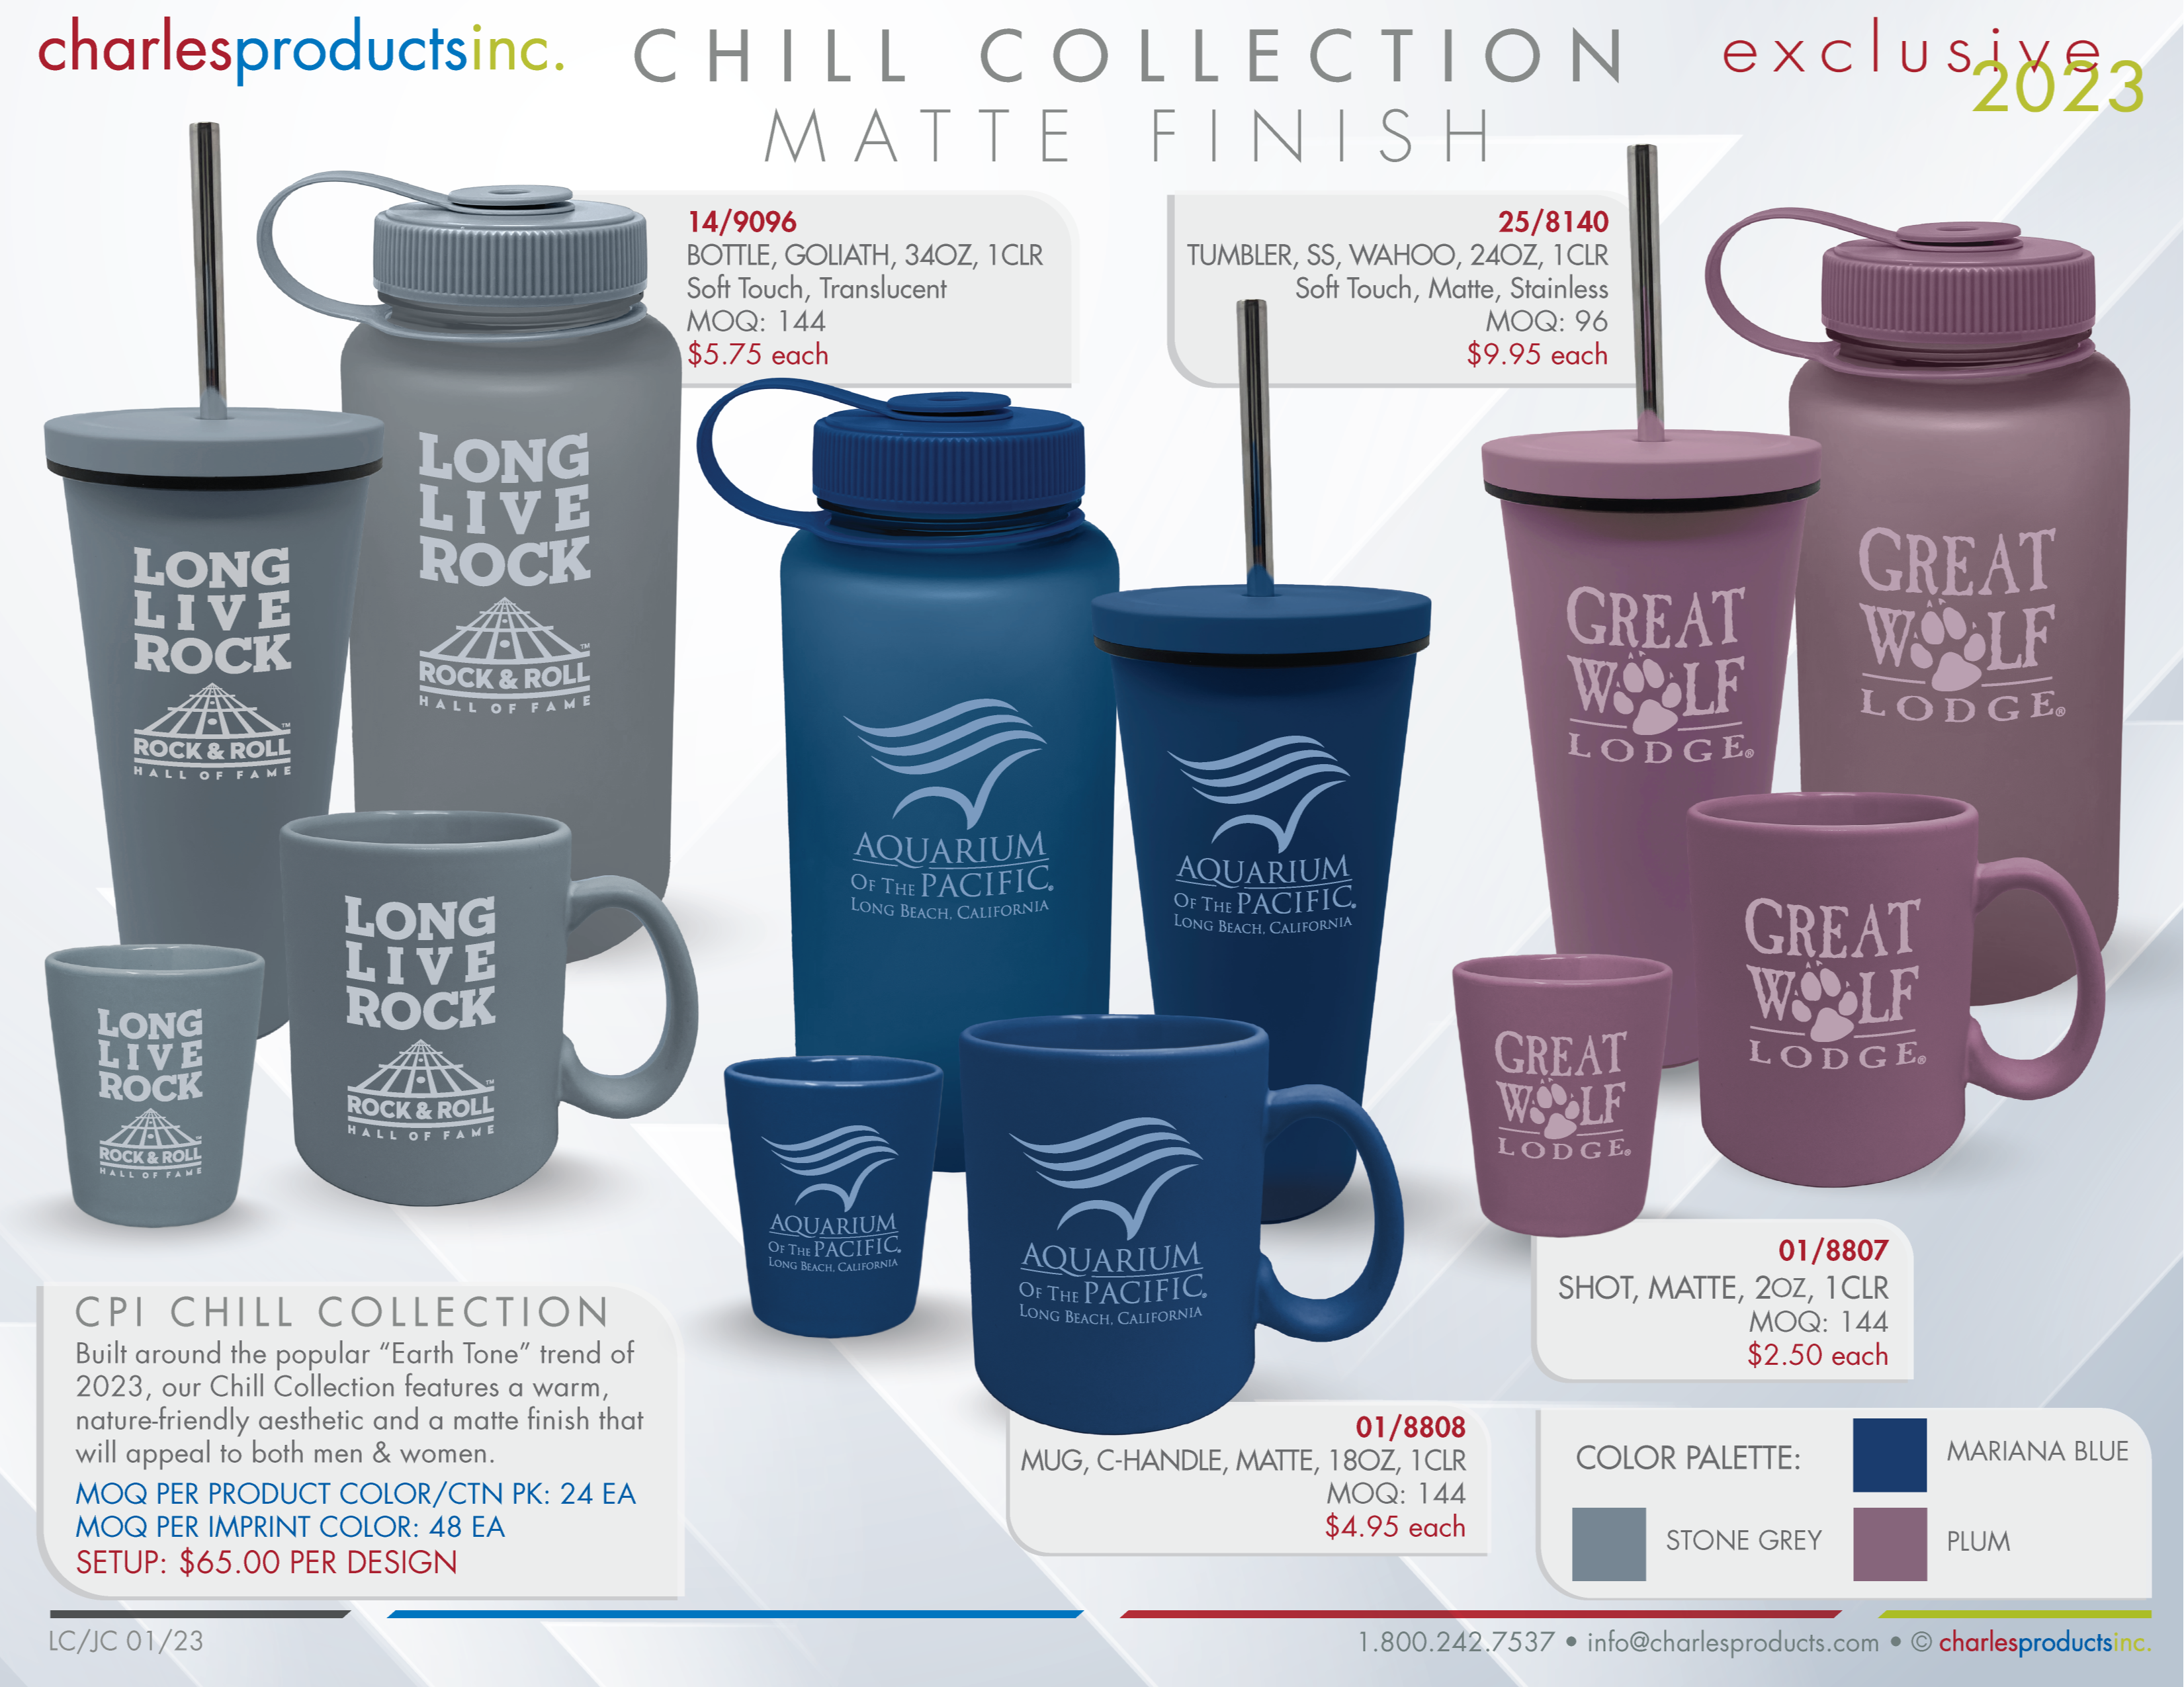 EXCLUSIVE 2023 CHILL COLLECTION 1361